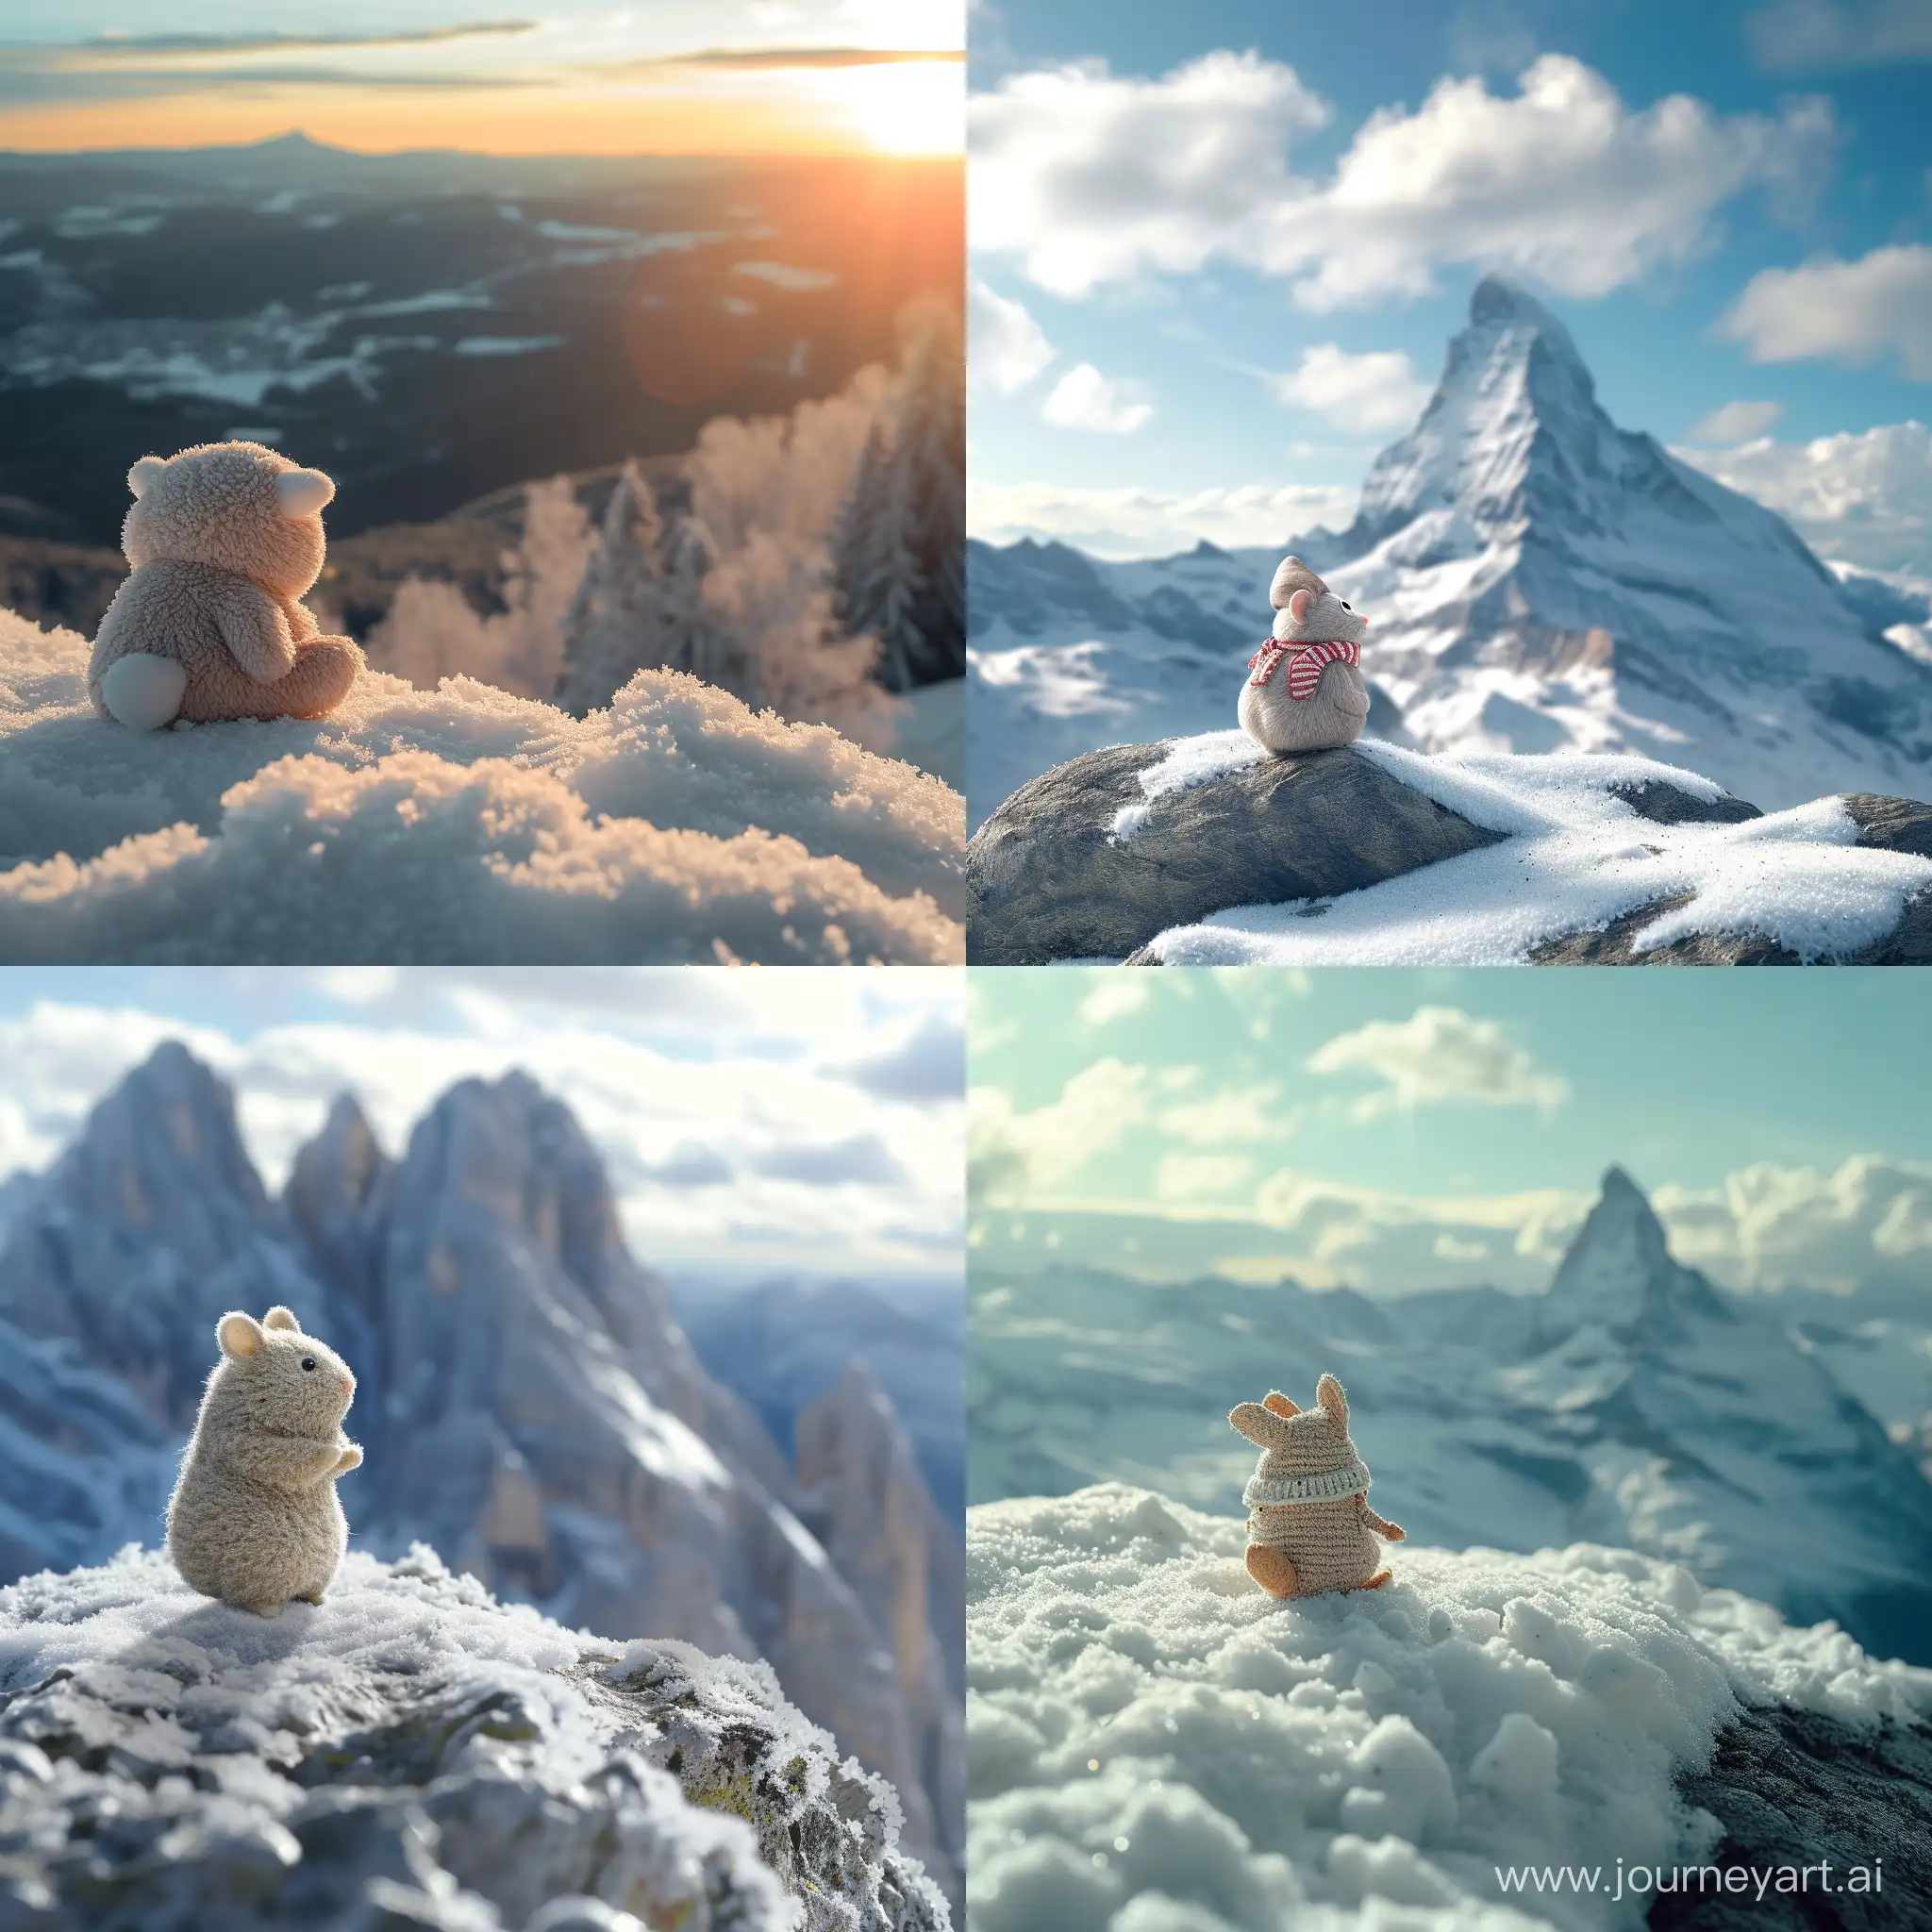 Moomin-Adventure-on-a-Snowy-Mountain-Captured-in-Stunning-DSLR-Photo-with-Unique-Depth-of-View